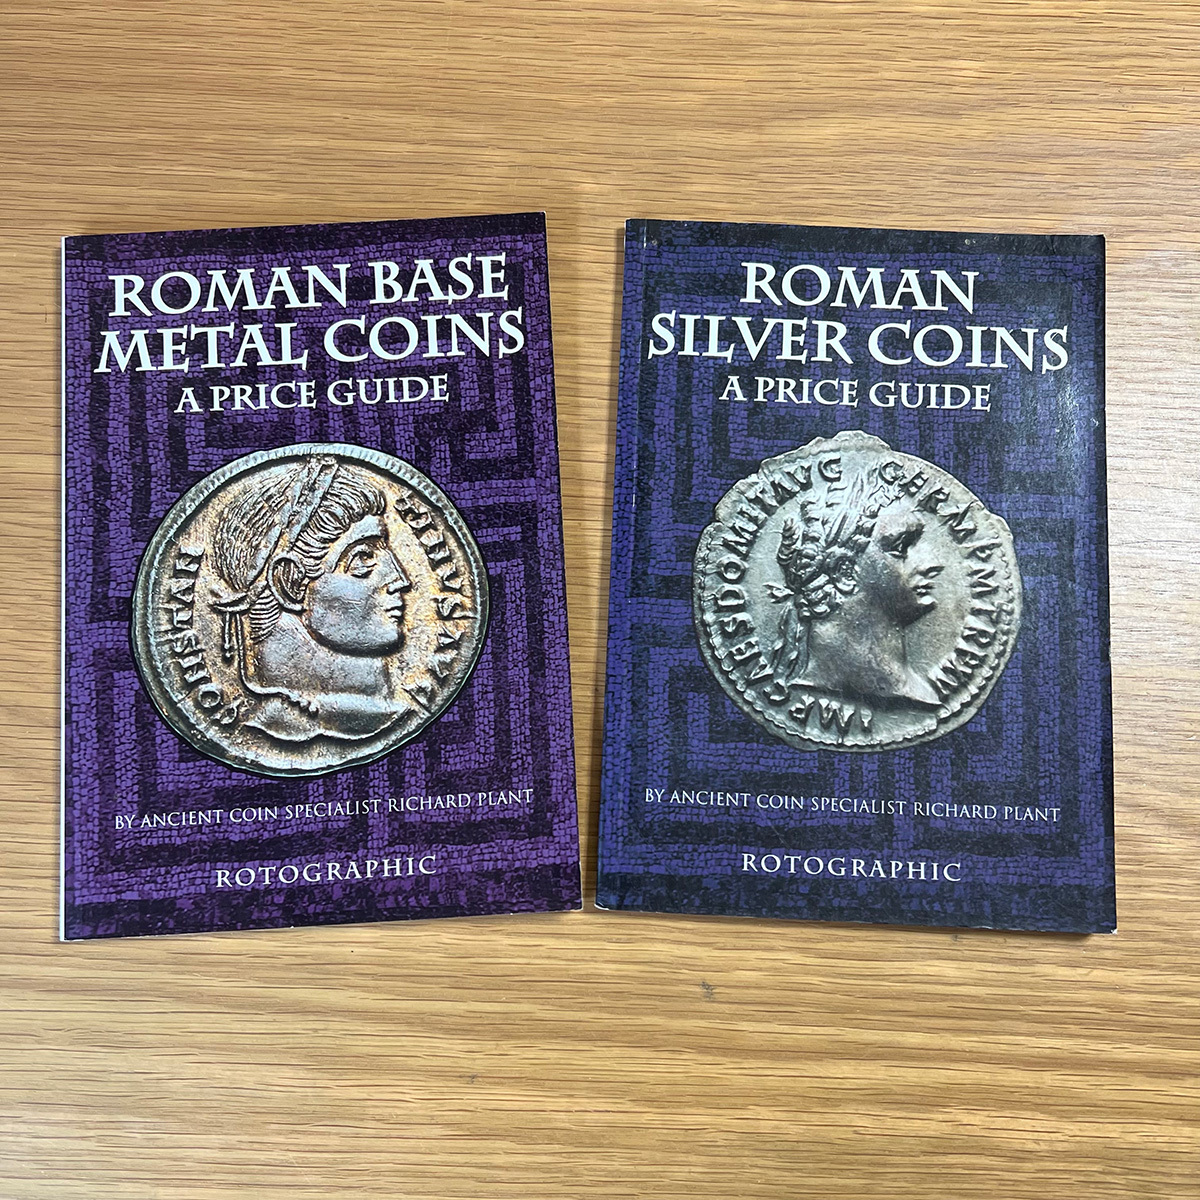 『ROMAN BASE METAL COINS』『ROMAN SILVER COINS』A PRICE GUIDE2冊セットの画像1